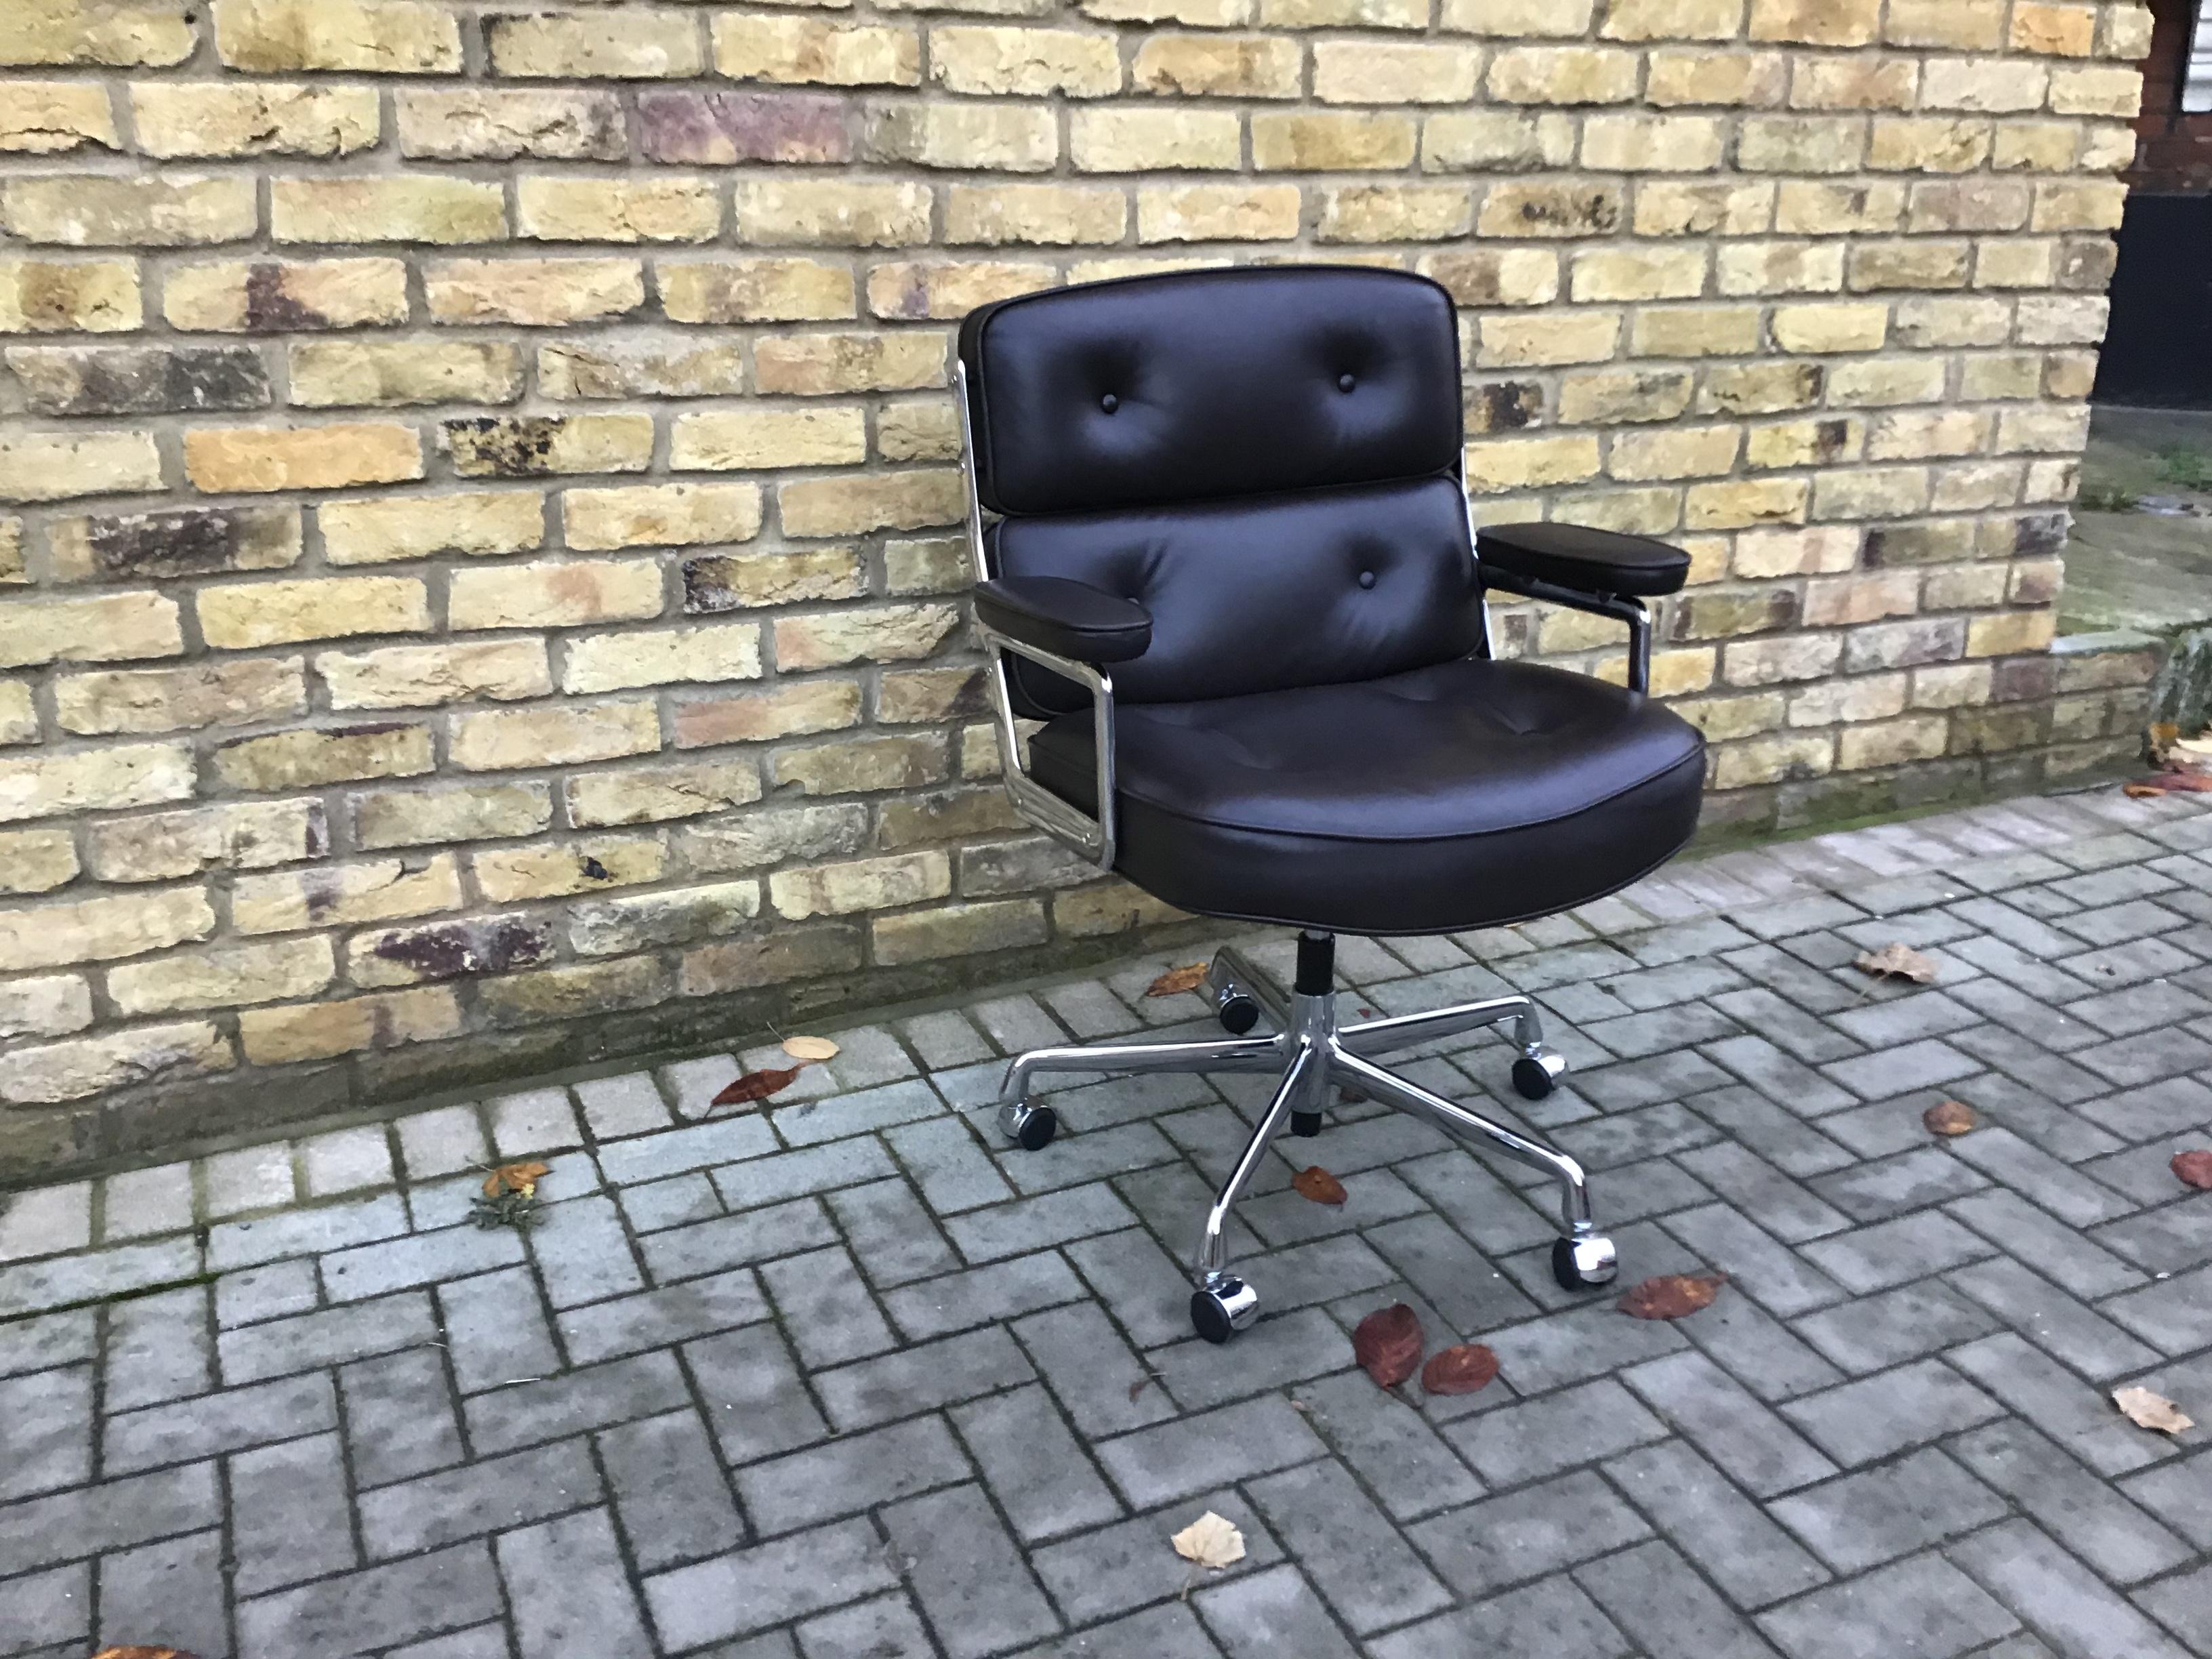   Time-Life Executive Chair by Charles & Ray Eames   im Zustand „Hervorragend“ in London, Lambeth